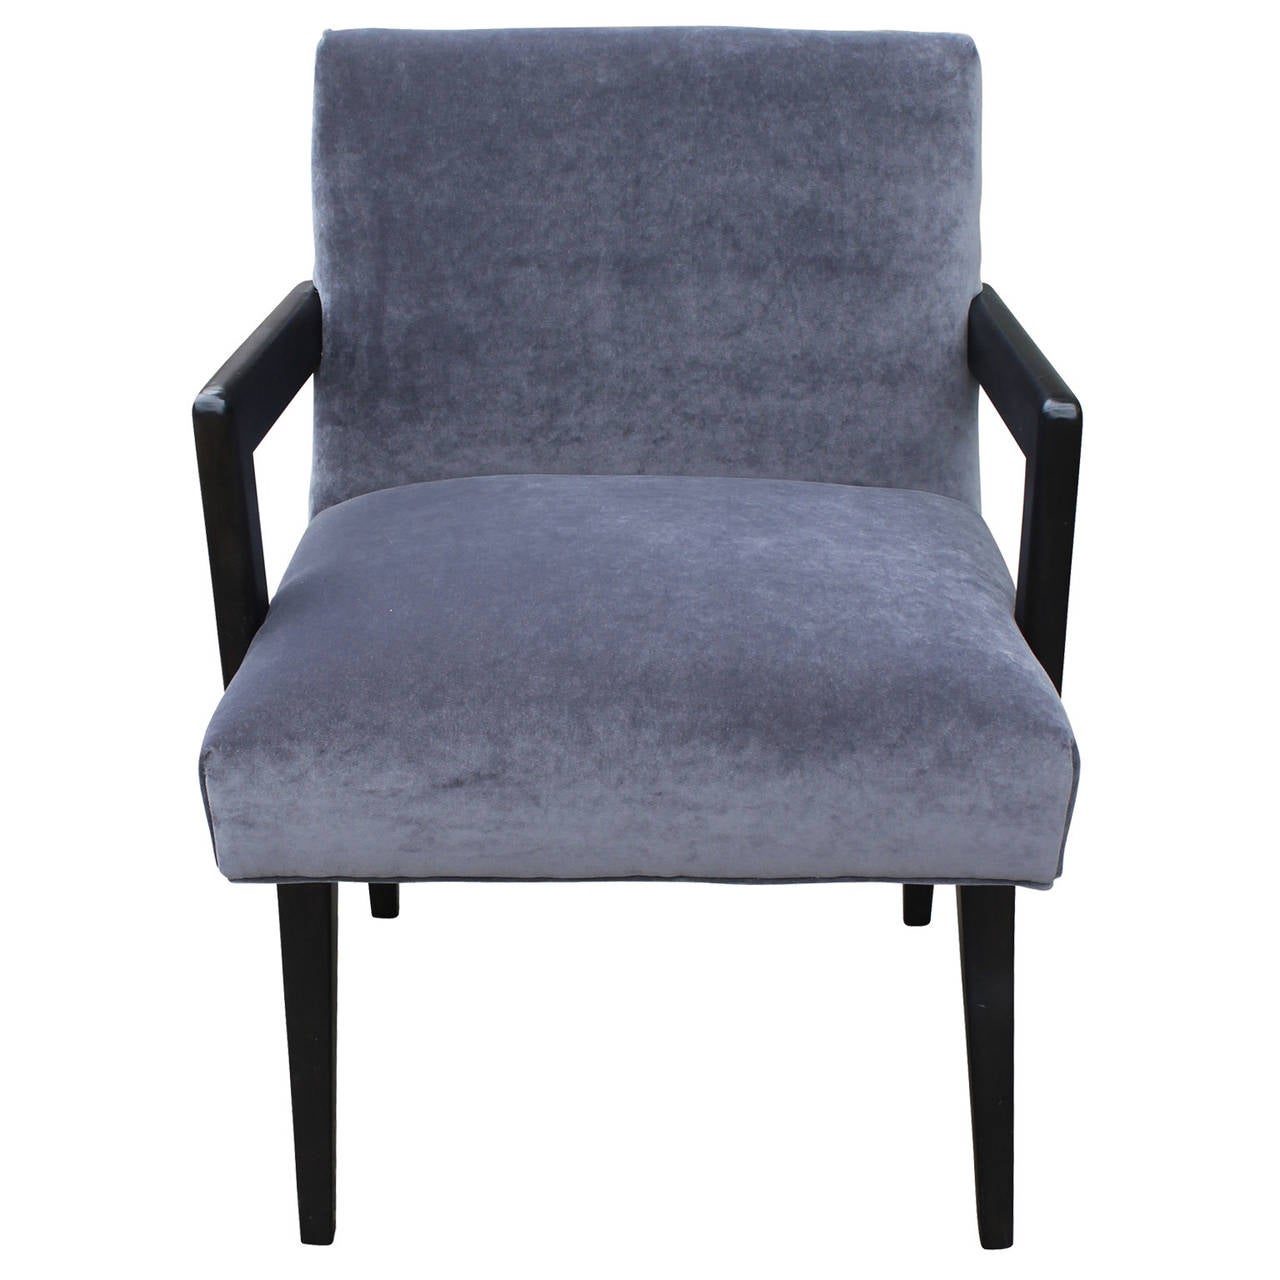 Great Armchair freshly upholstered in luxe grey velvet. Arms and legs are finished in a glossy black stain. Chair has great lines and negative space.